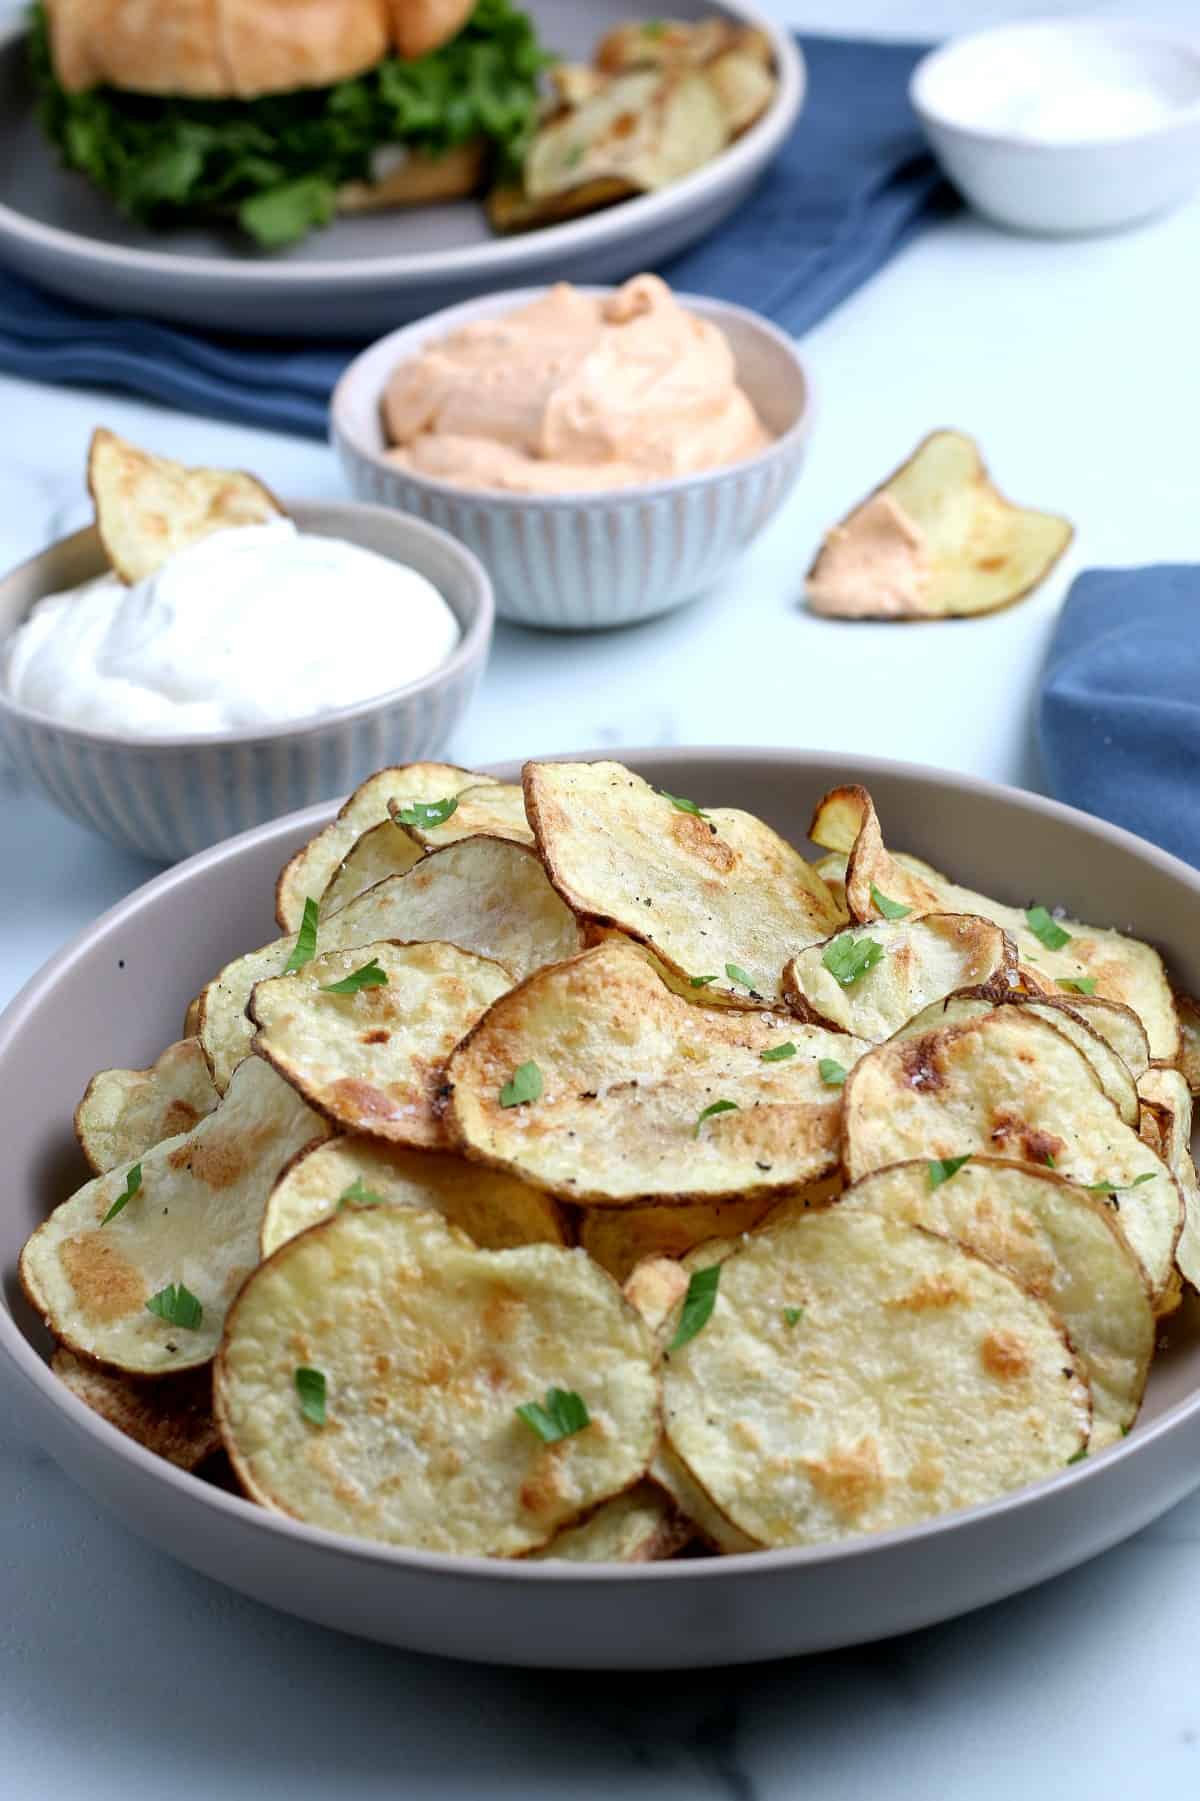 Bowl full of homemade potato chips with dipping sauces behind.